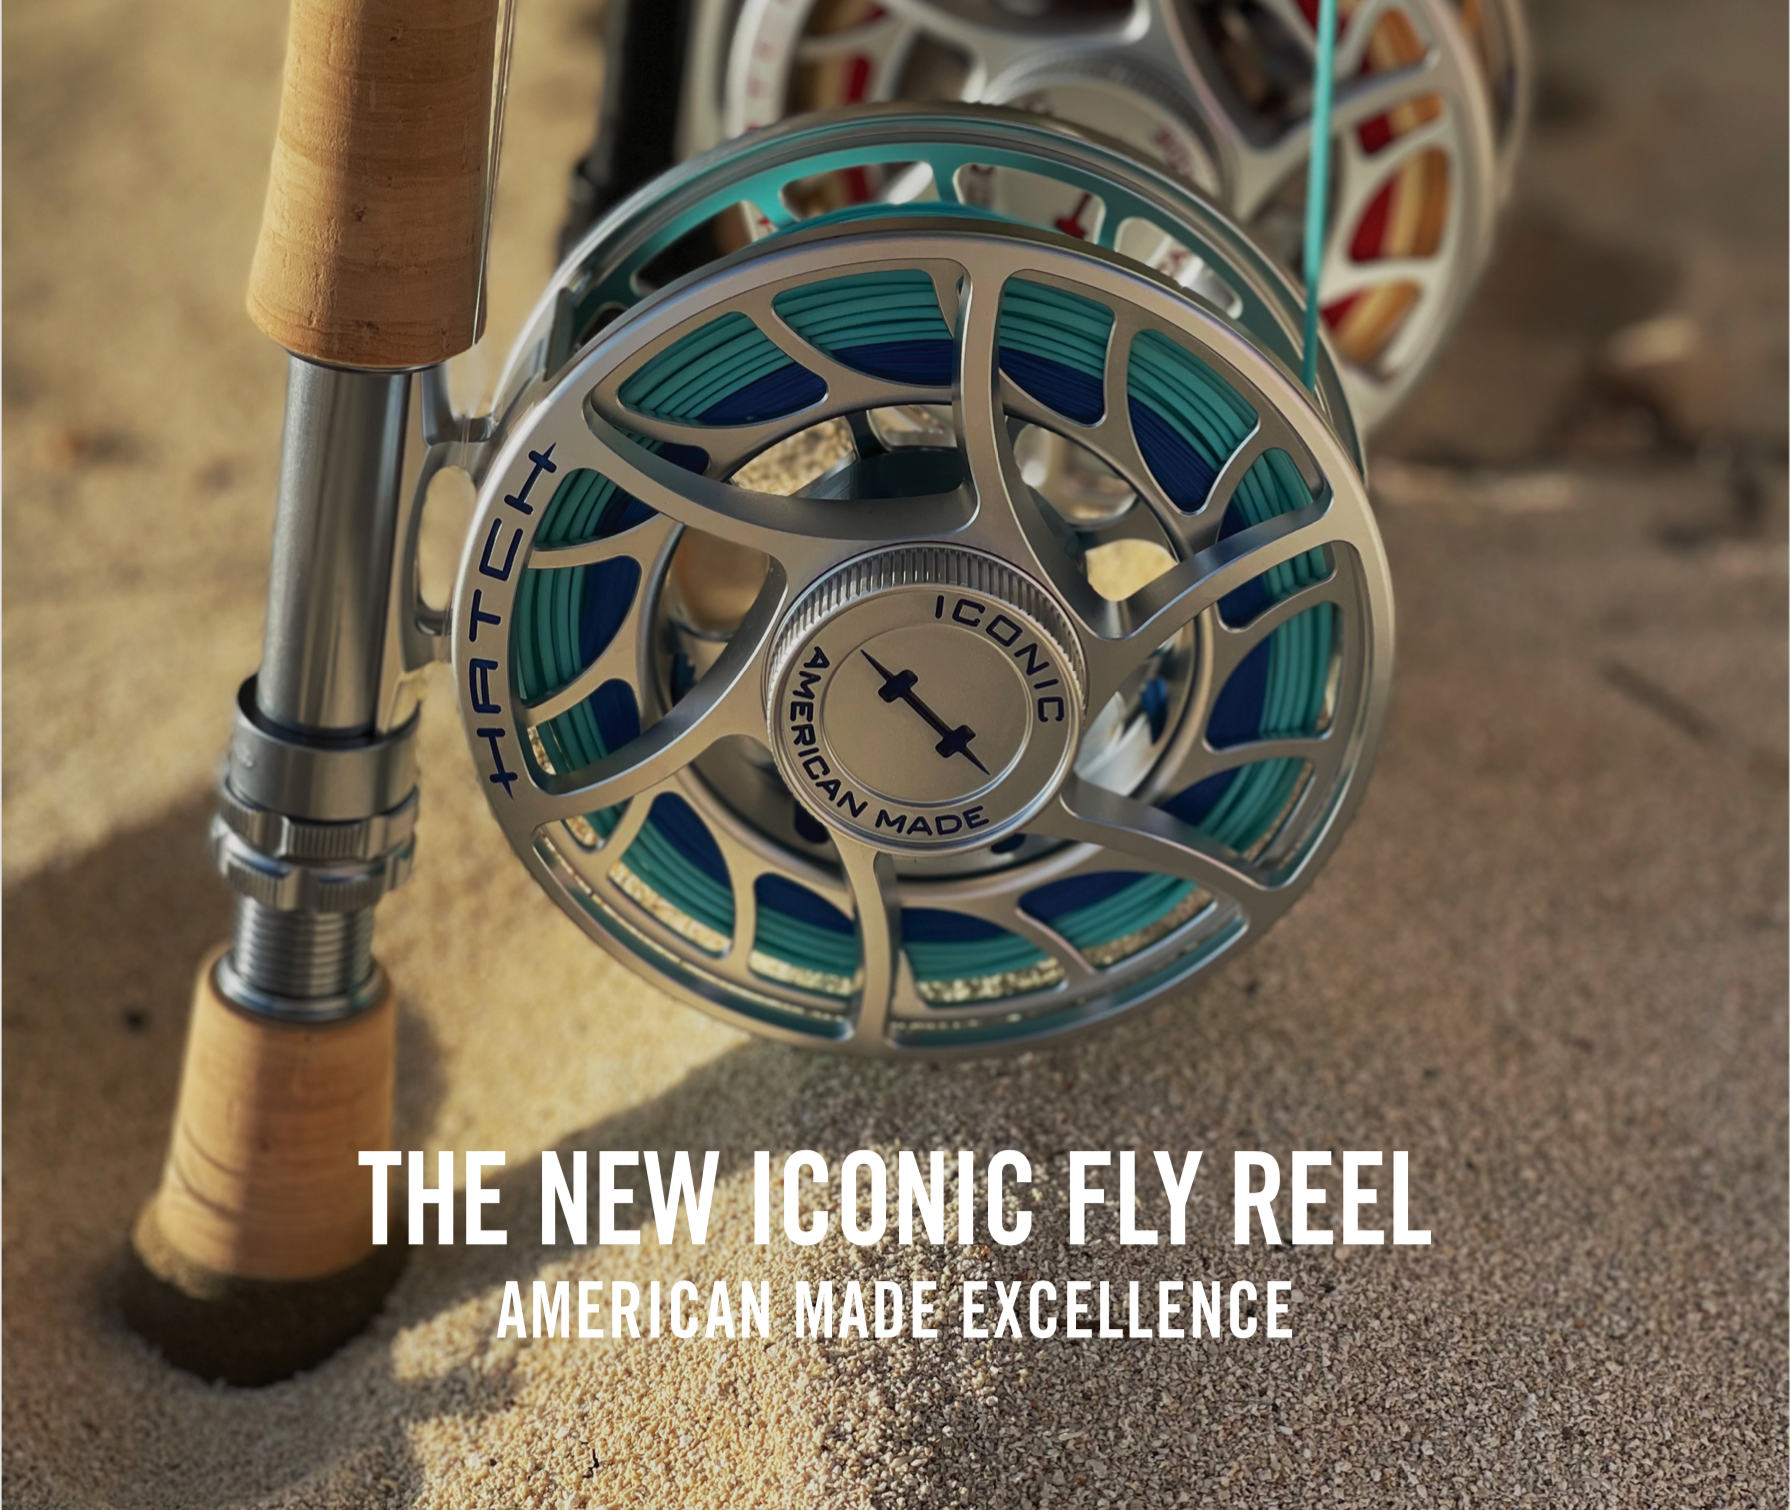 Hatch - Premium Fly Fishing Reels - Our Custom Shop Pink 7 Plus Gen 2  Finatic Reels are now available at your local dealer. $100 from each reel  sold goes directly to